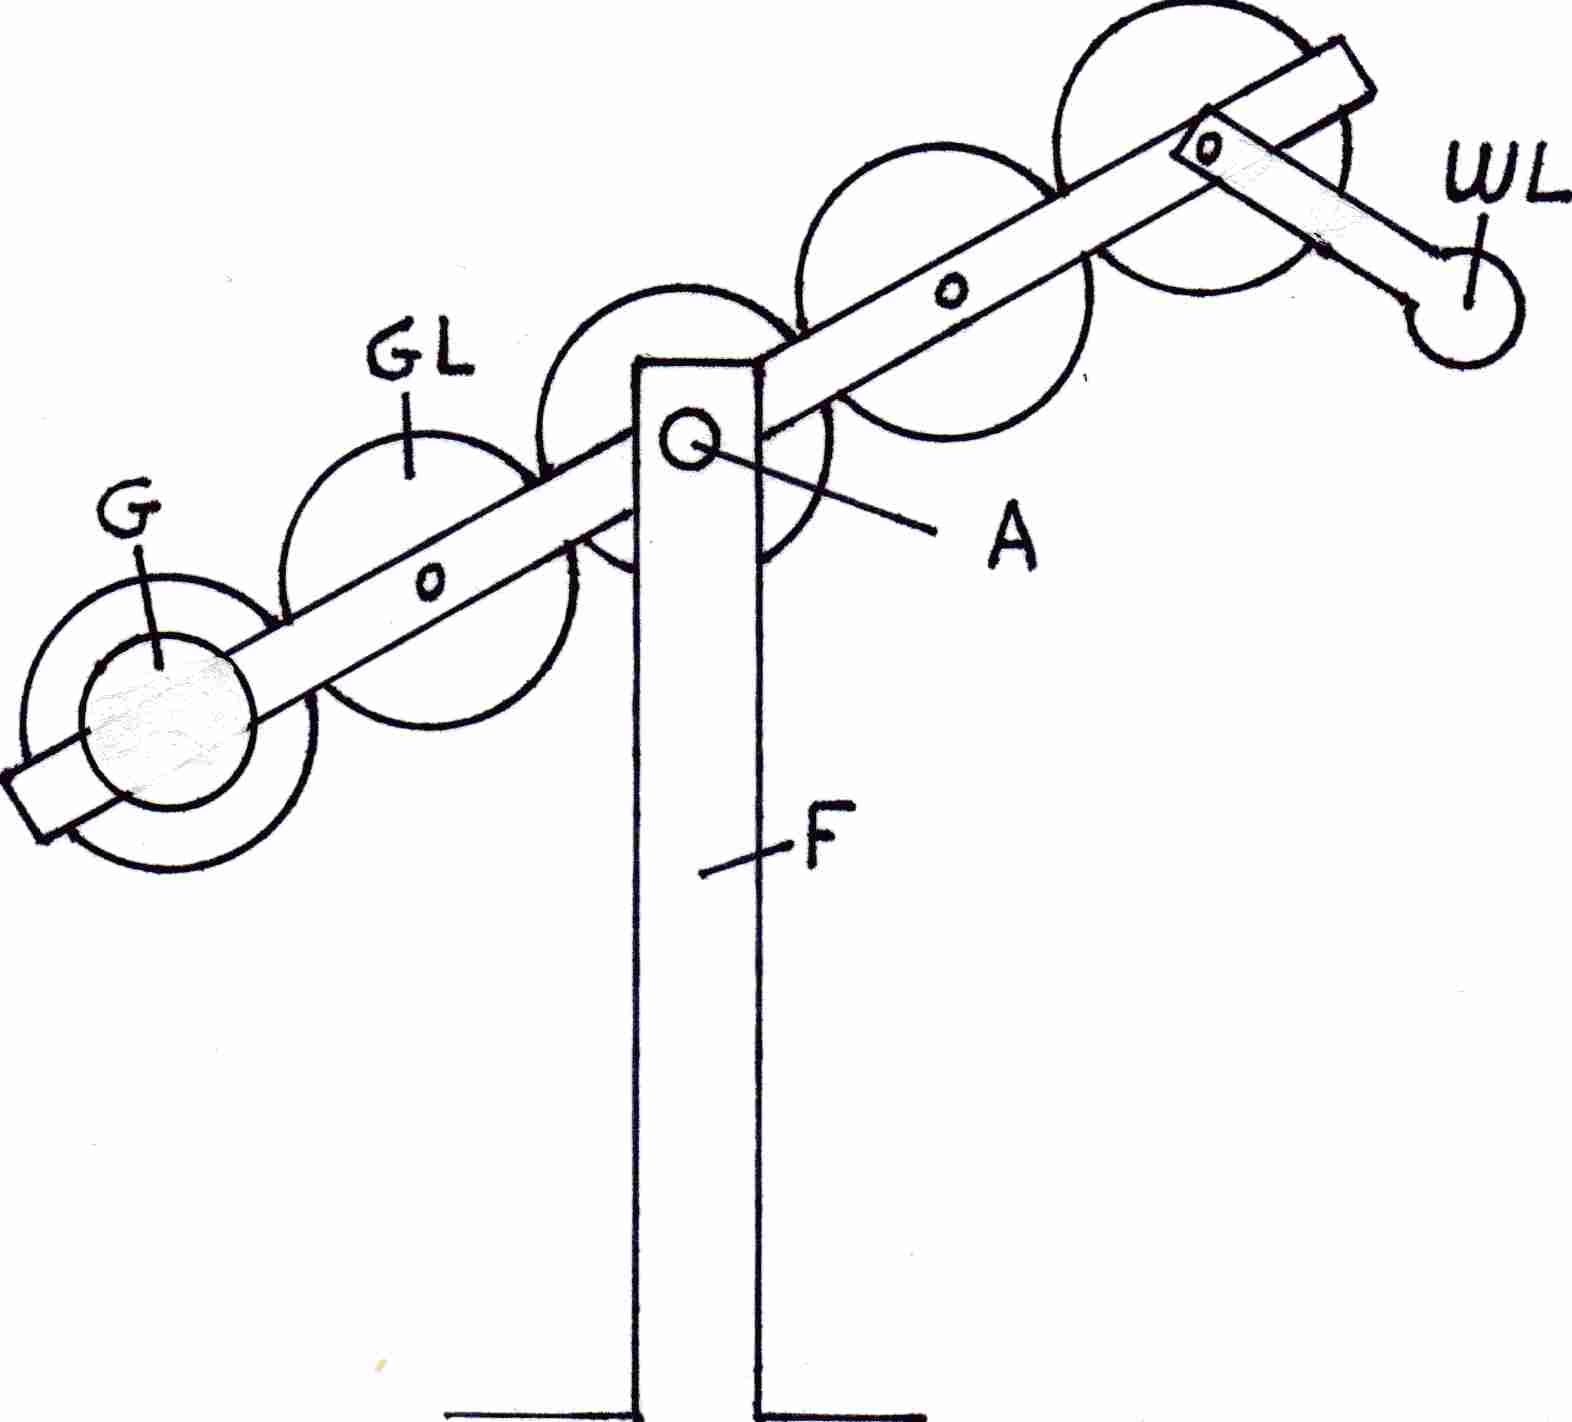 diagram of wheels on a beam mounted with a fulcrum, but at tilt